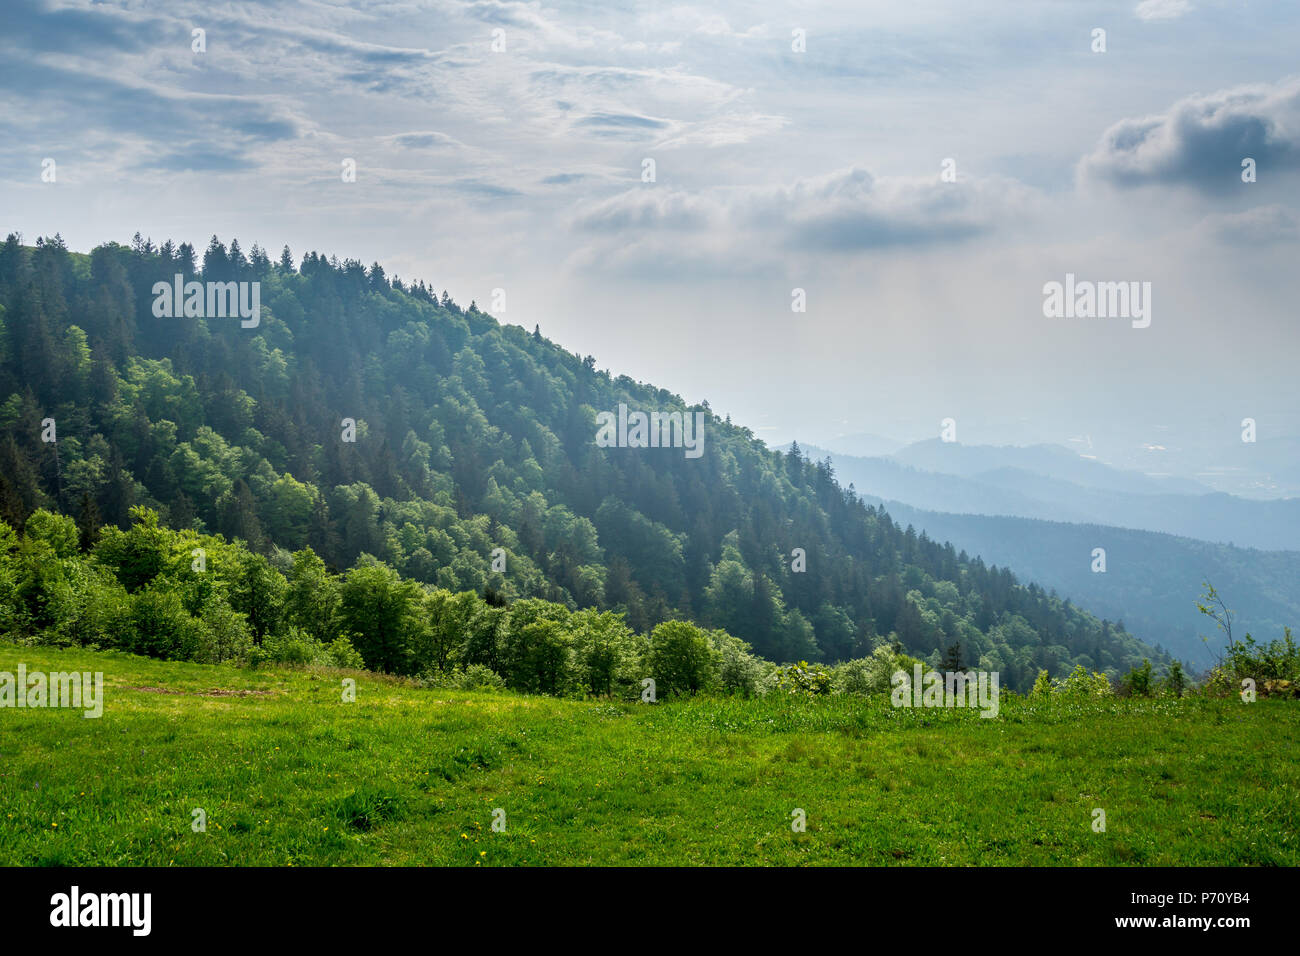 Germany, Endless black forest mountain landscape in nature on mountain Kandel Stock Photo